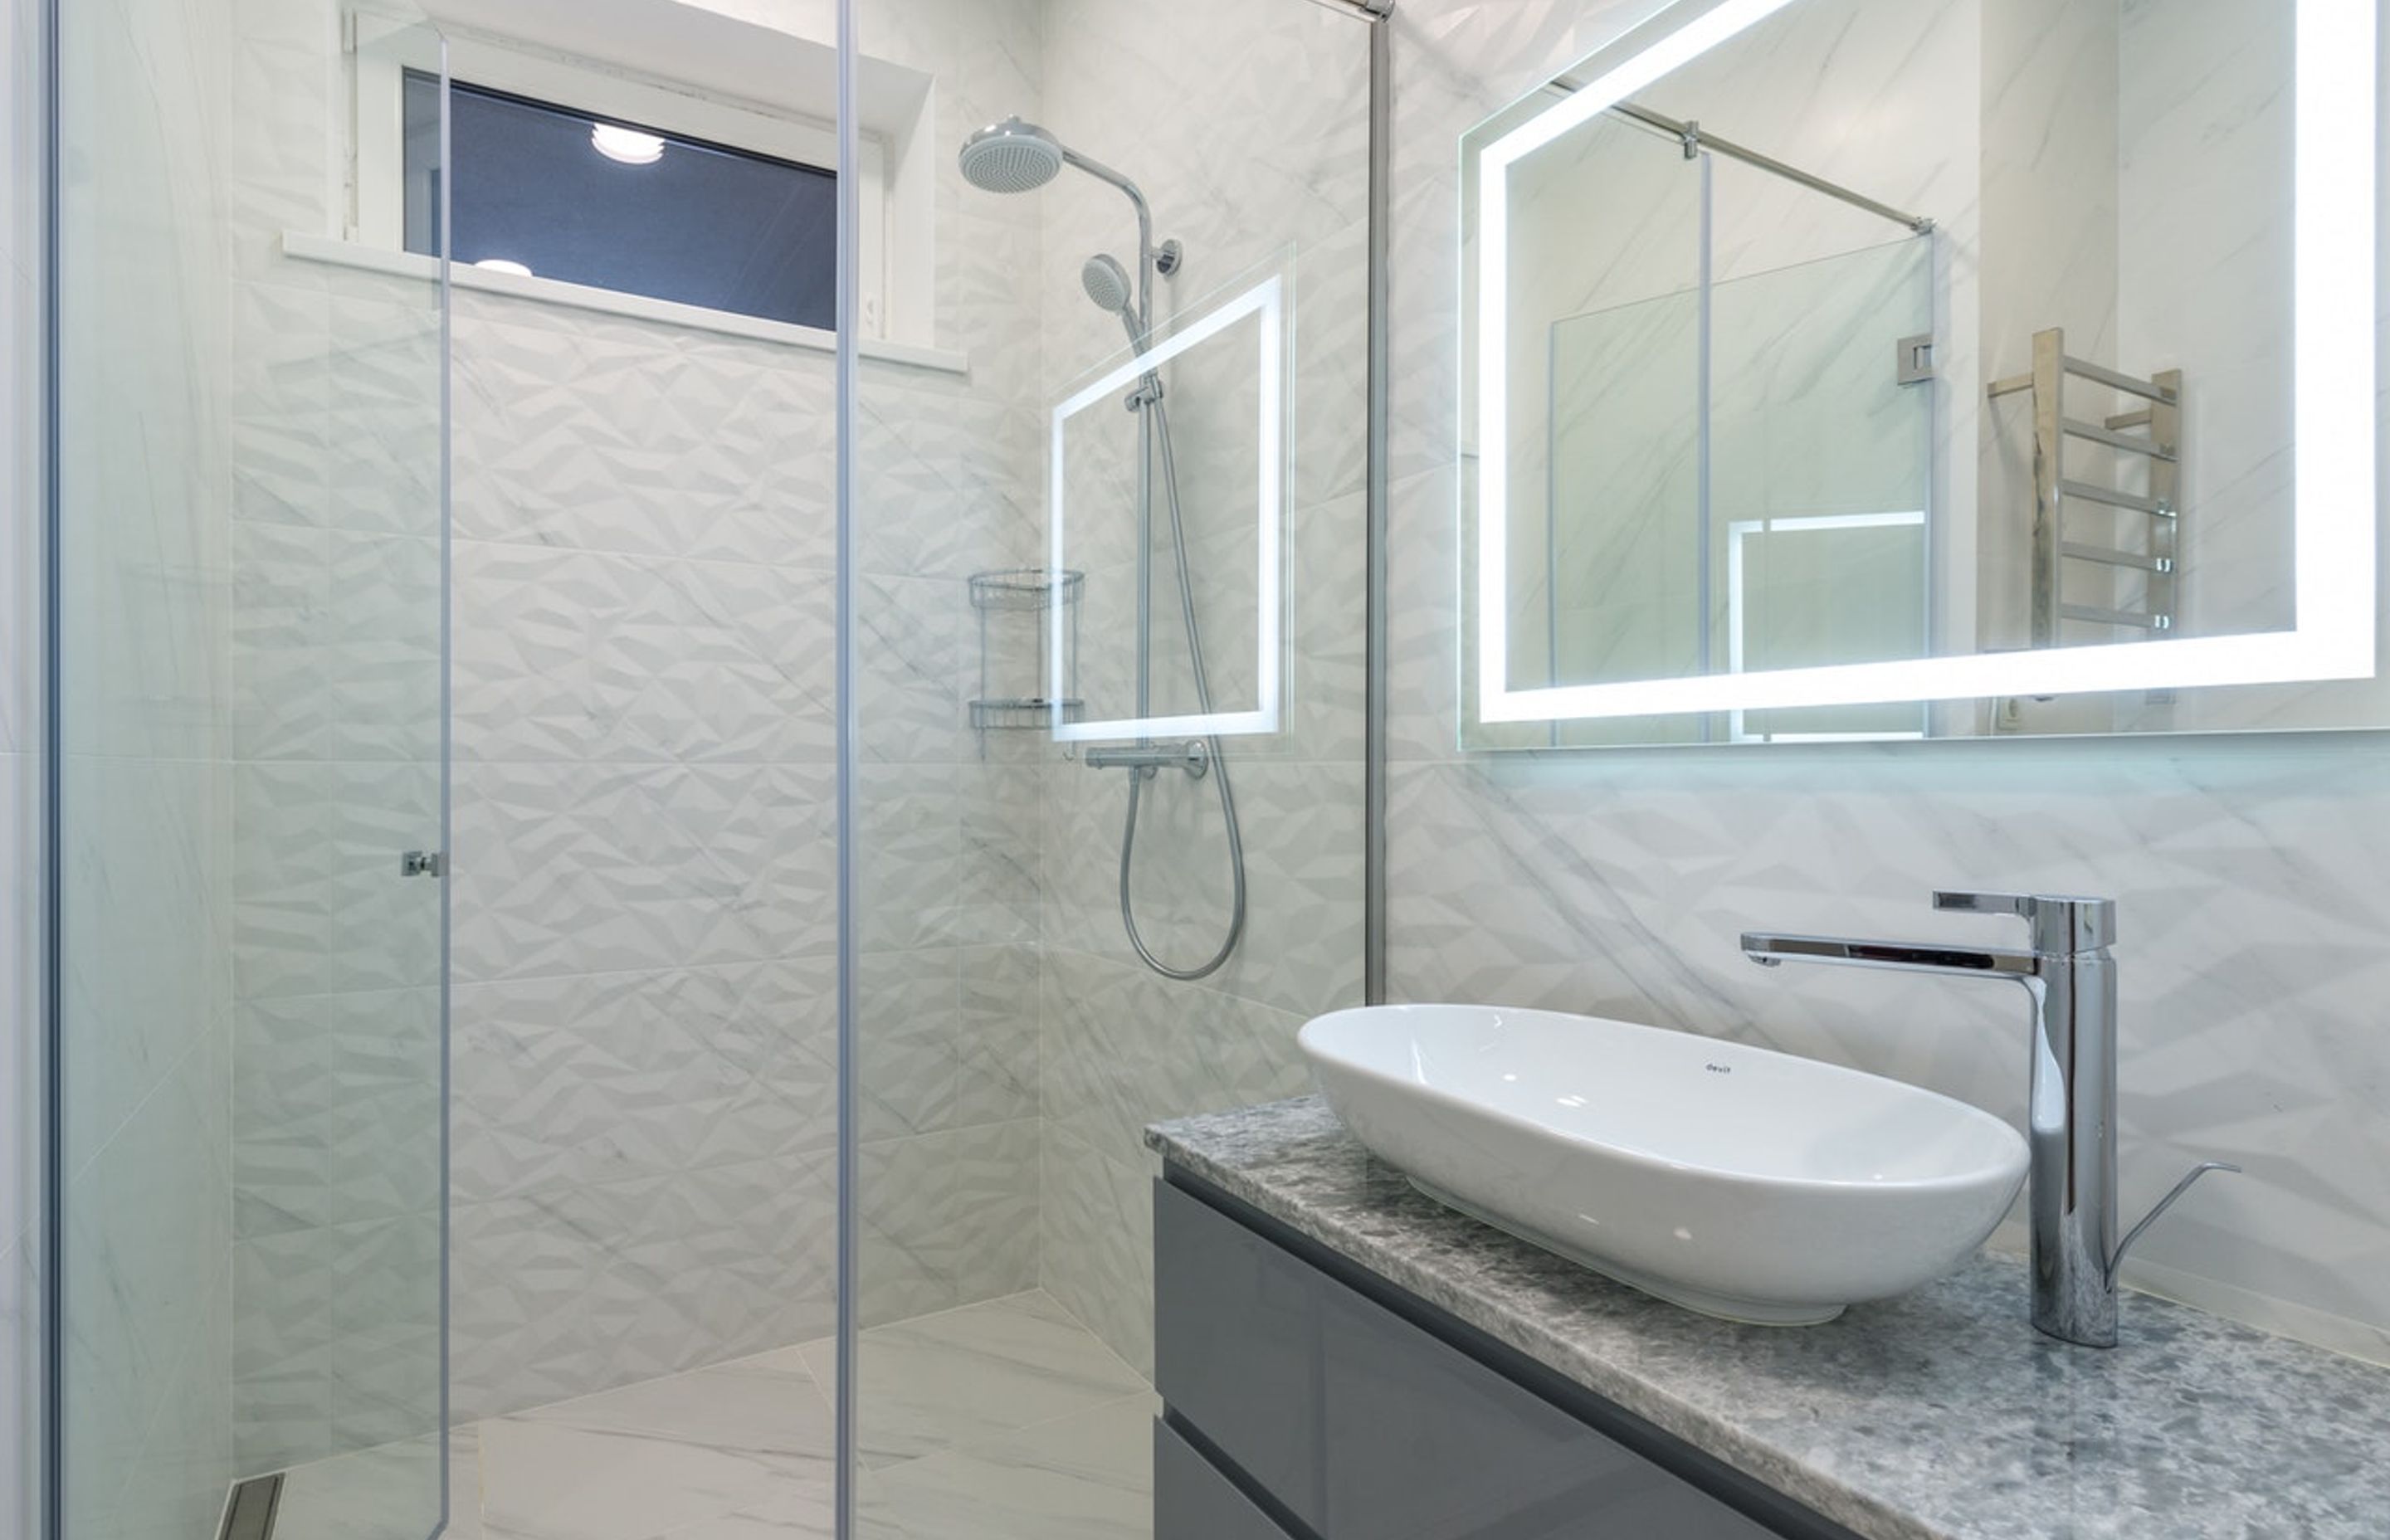 By using glass doors, your shower can act as as an extension of the bathroom space.